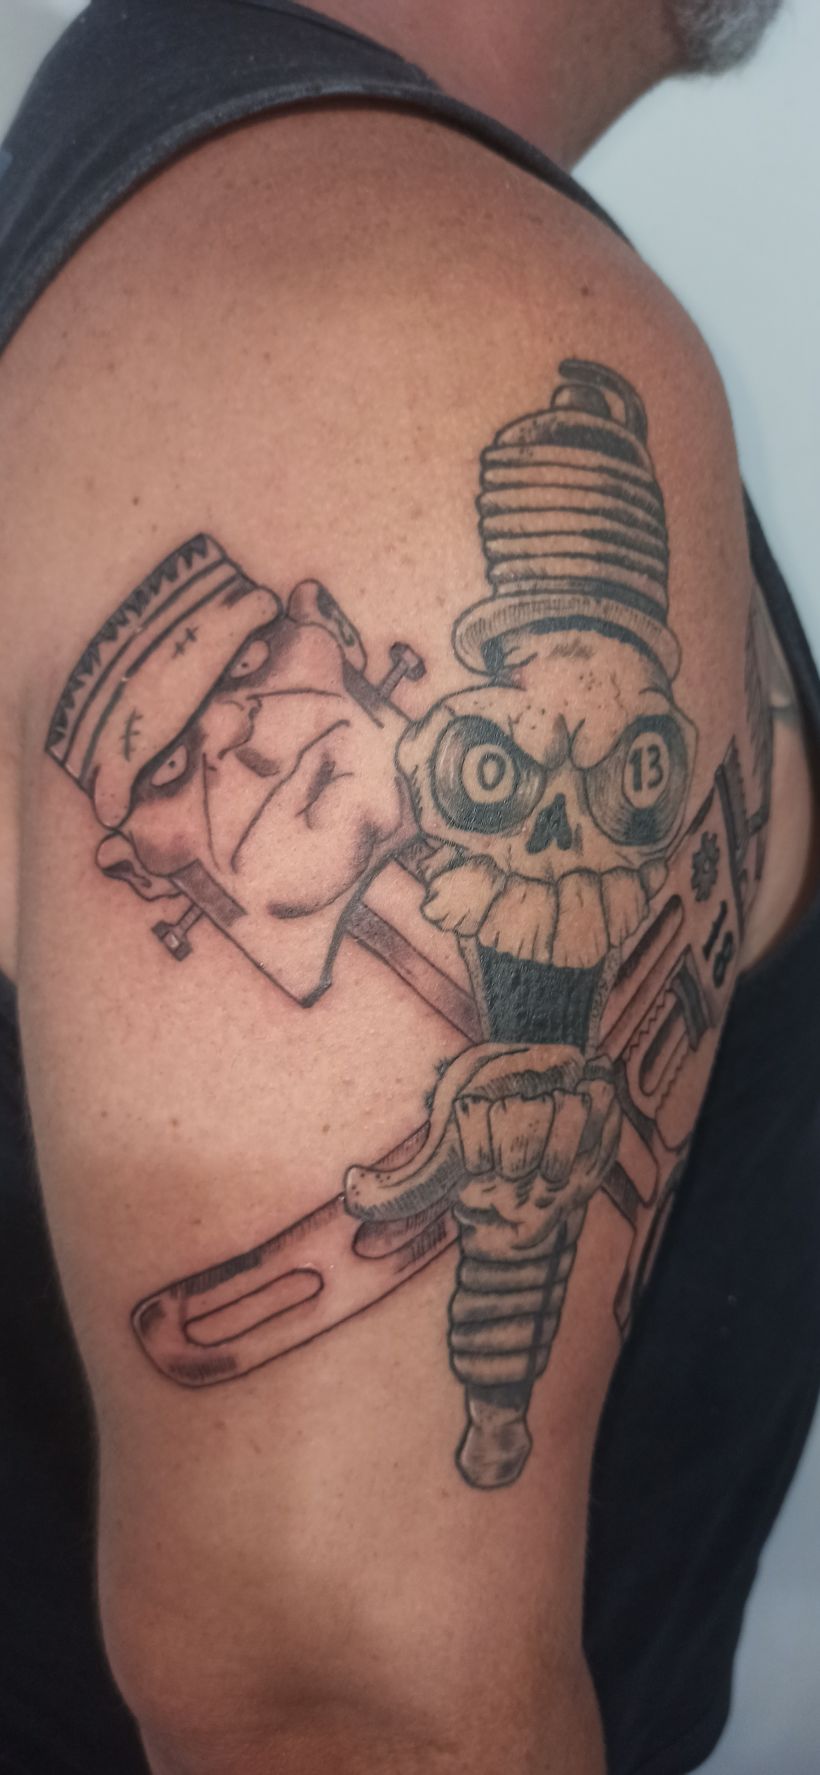 Don't see many mechanical tattoos out there. Is there a reason? I plan to  get a first tattoo like this, already put a pre-payment, but starting to  get more insecure as time